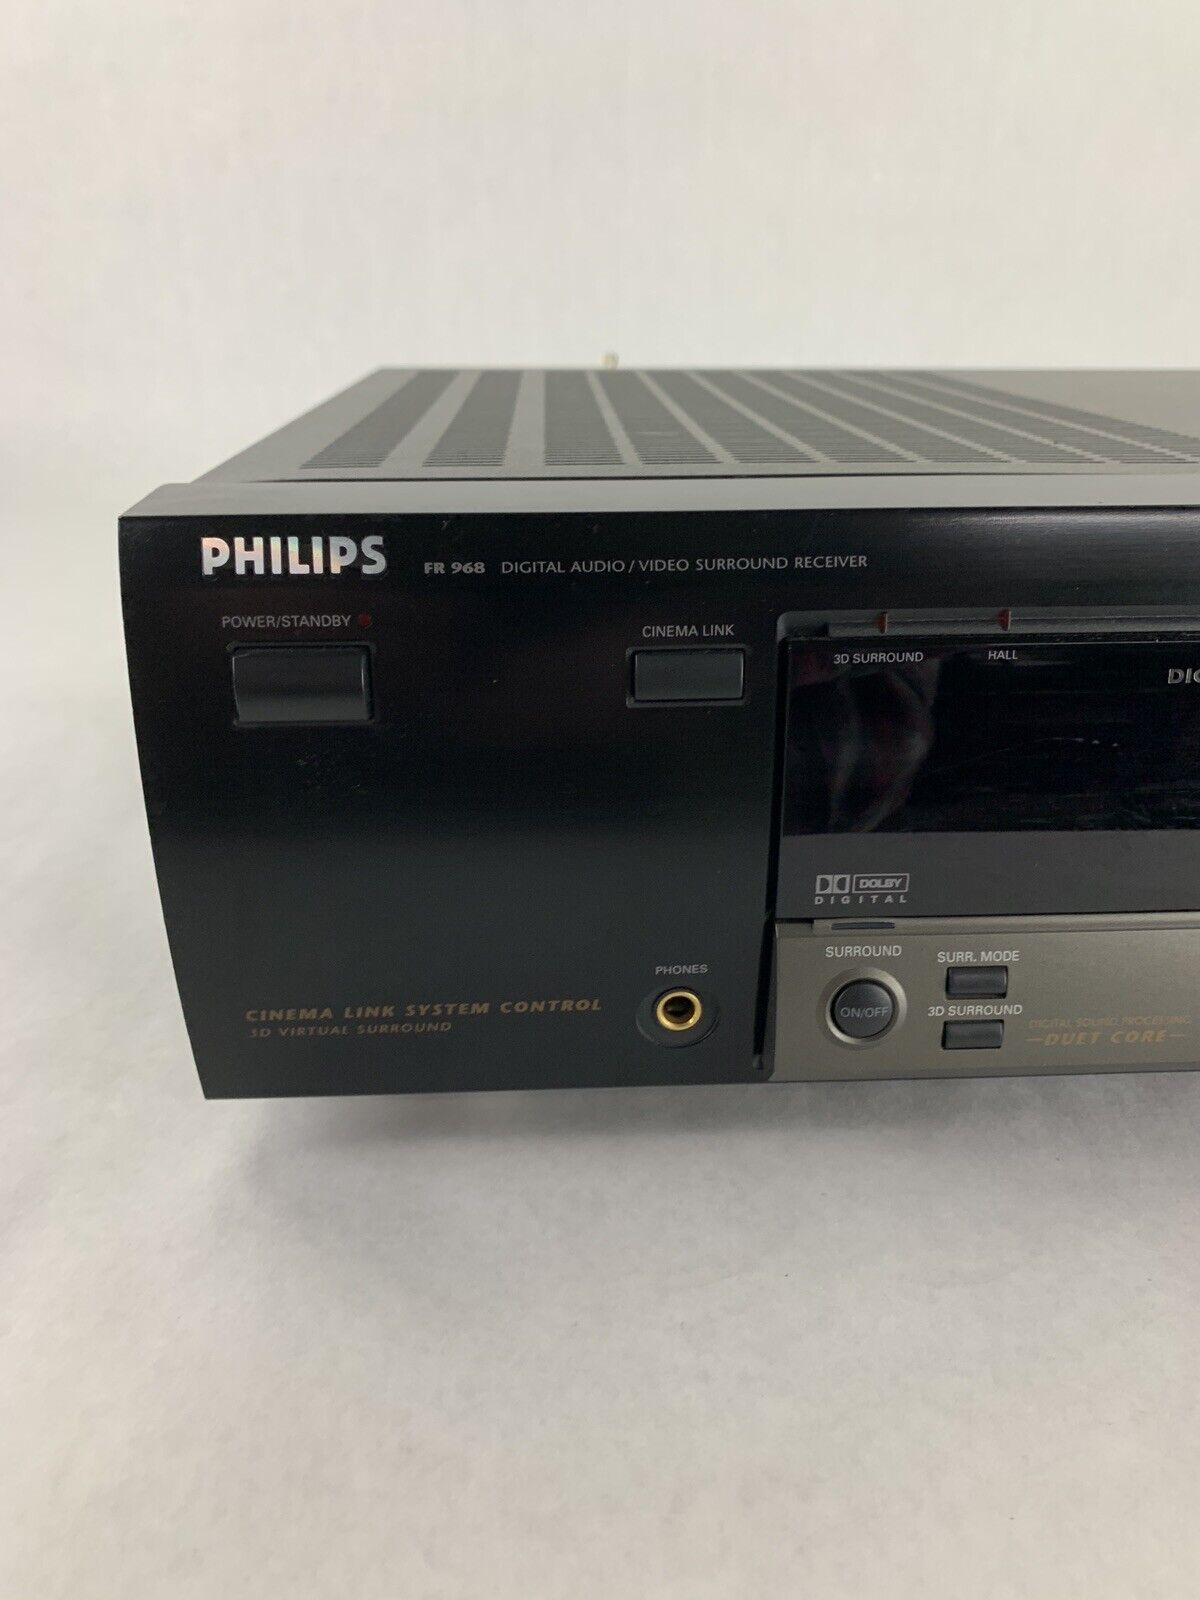 Philips FR968/17 Receiver Digital Audio Video 100W 5.1-Ch Surround Stereo Tested